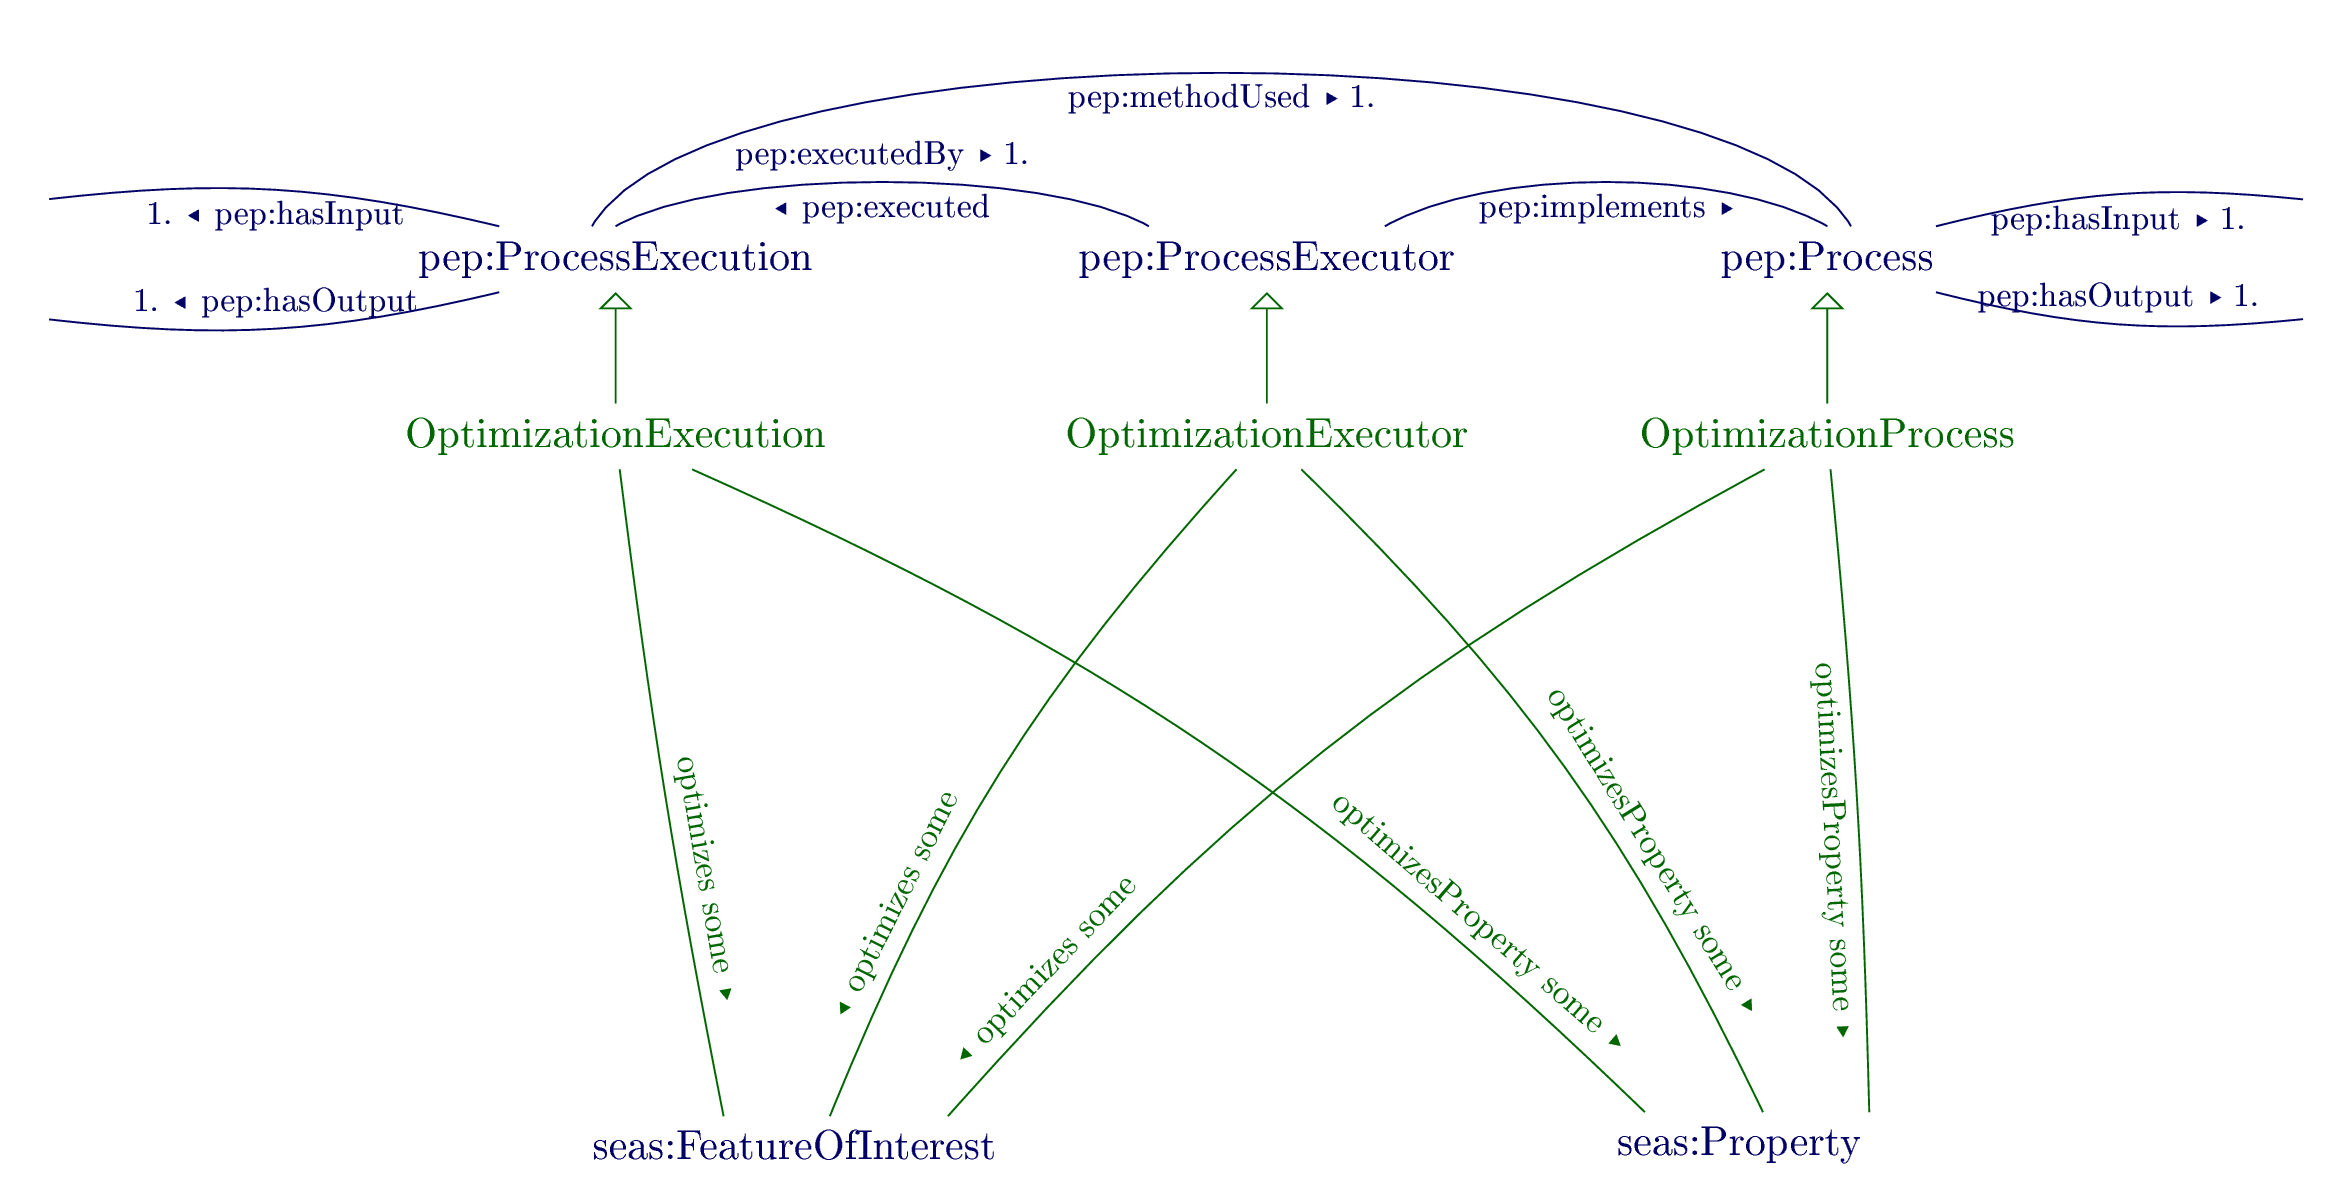 Overview of the Optimization ontology